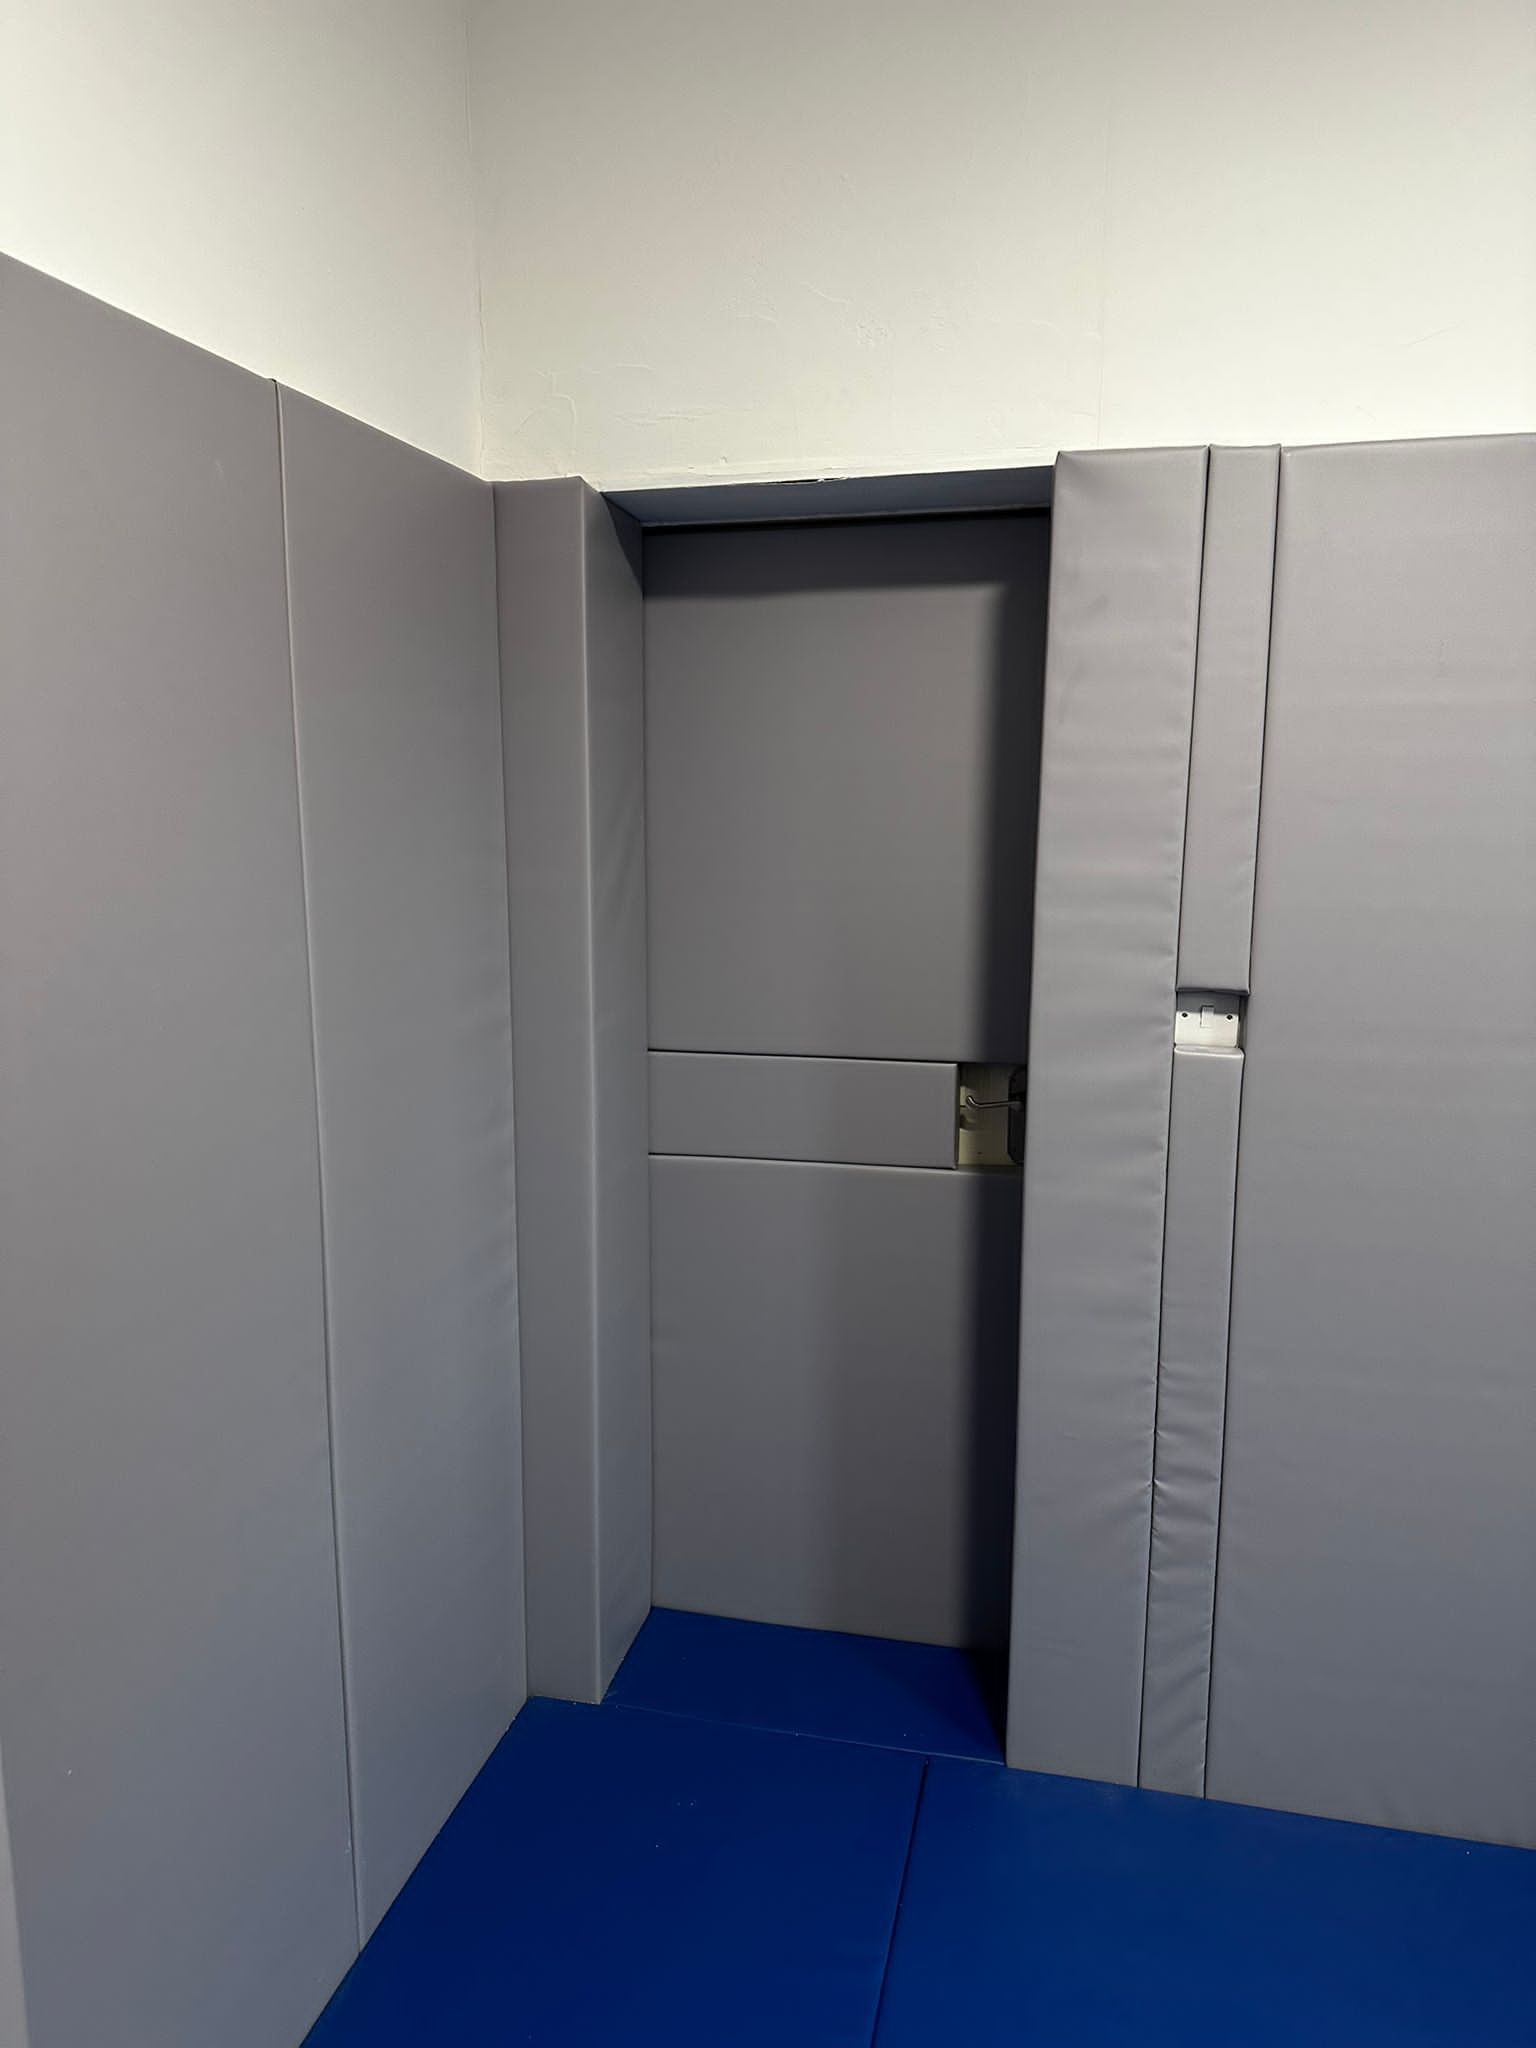 room with gray padded door and walls and a blue padded floor